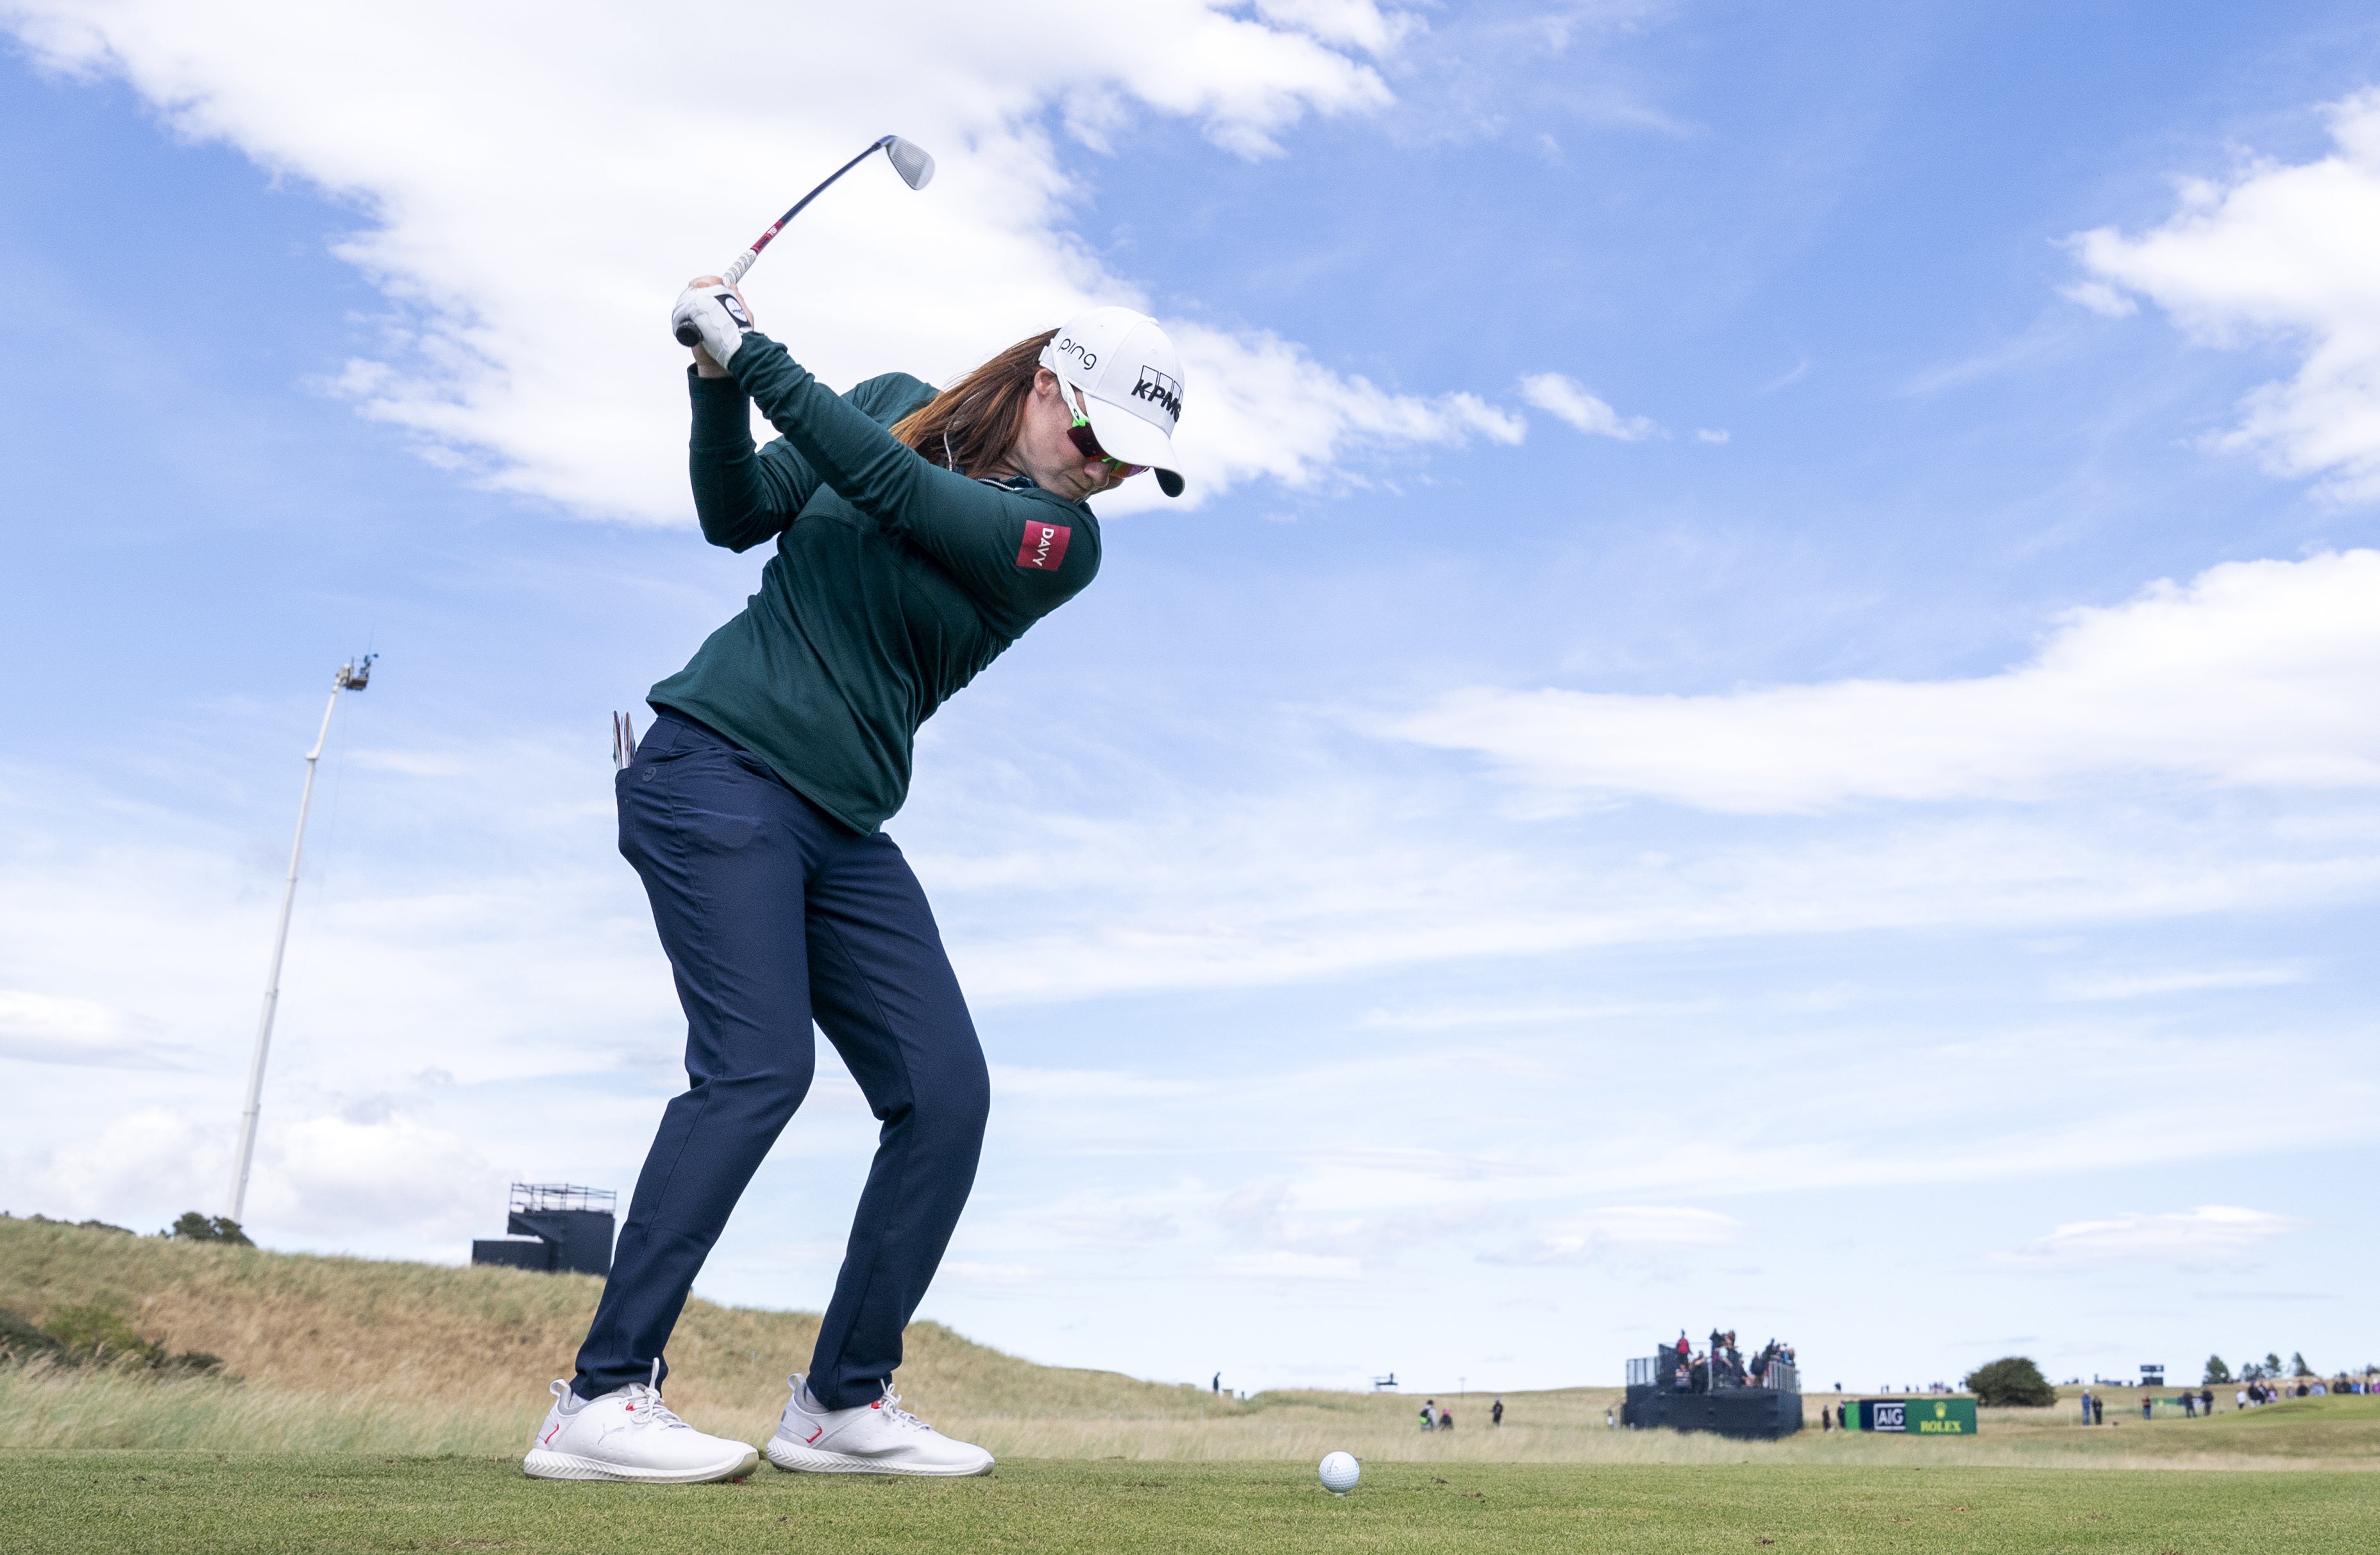 Ireland’s Leona Maguire on the 4th tee during day four of the AIG Women’s Open at Muirfield (Jane Barlow/PA)